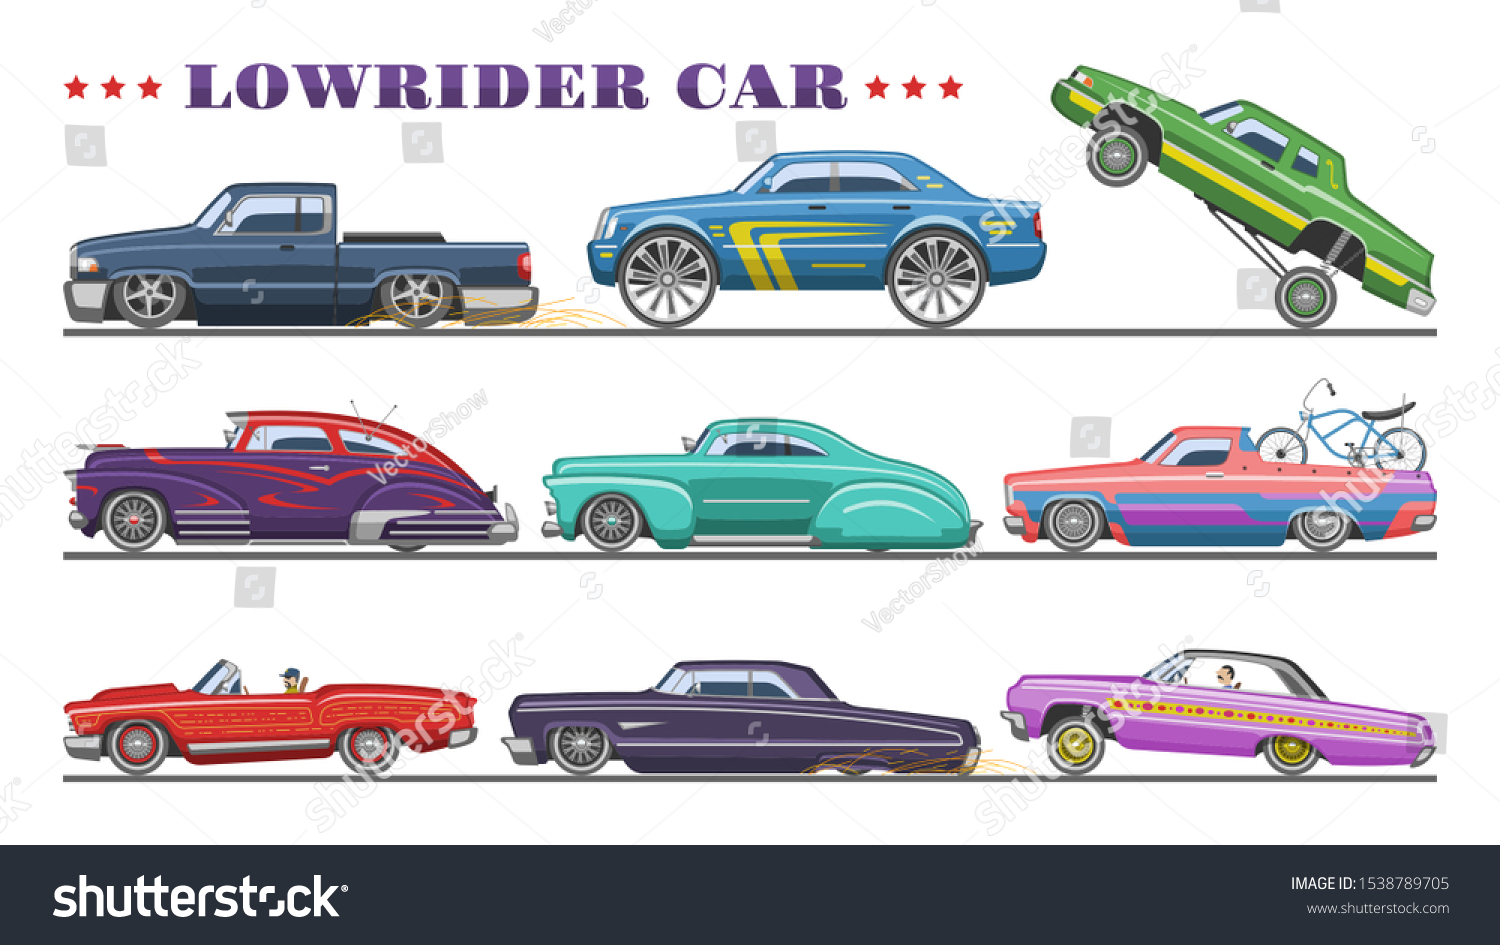 SVG of Car vector vintage low rider auto and retro old automobile transport illustration set of classic lowrider muscle vehicle rod transportation isolated on white background. svg